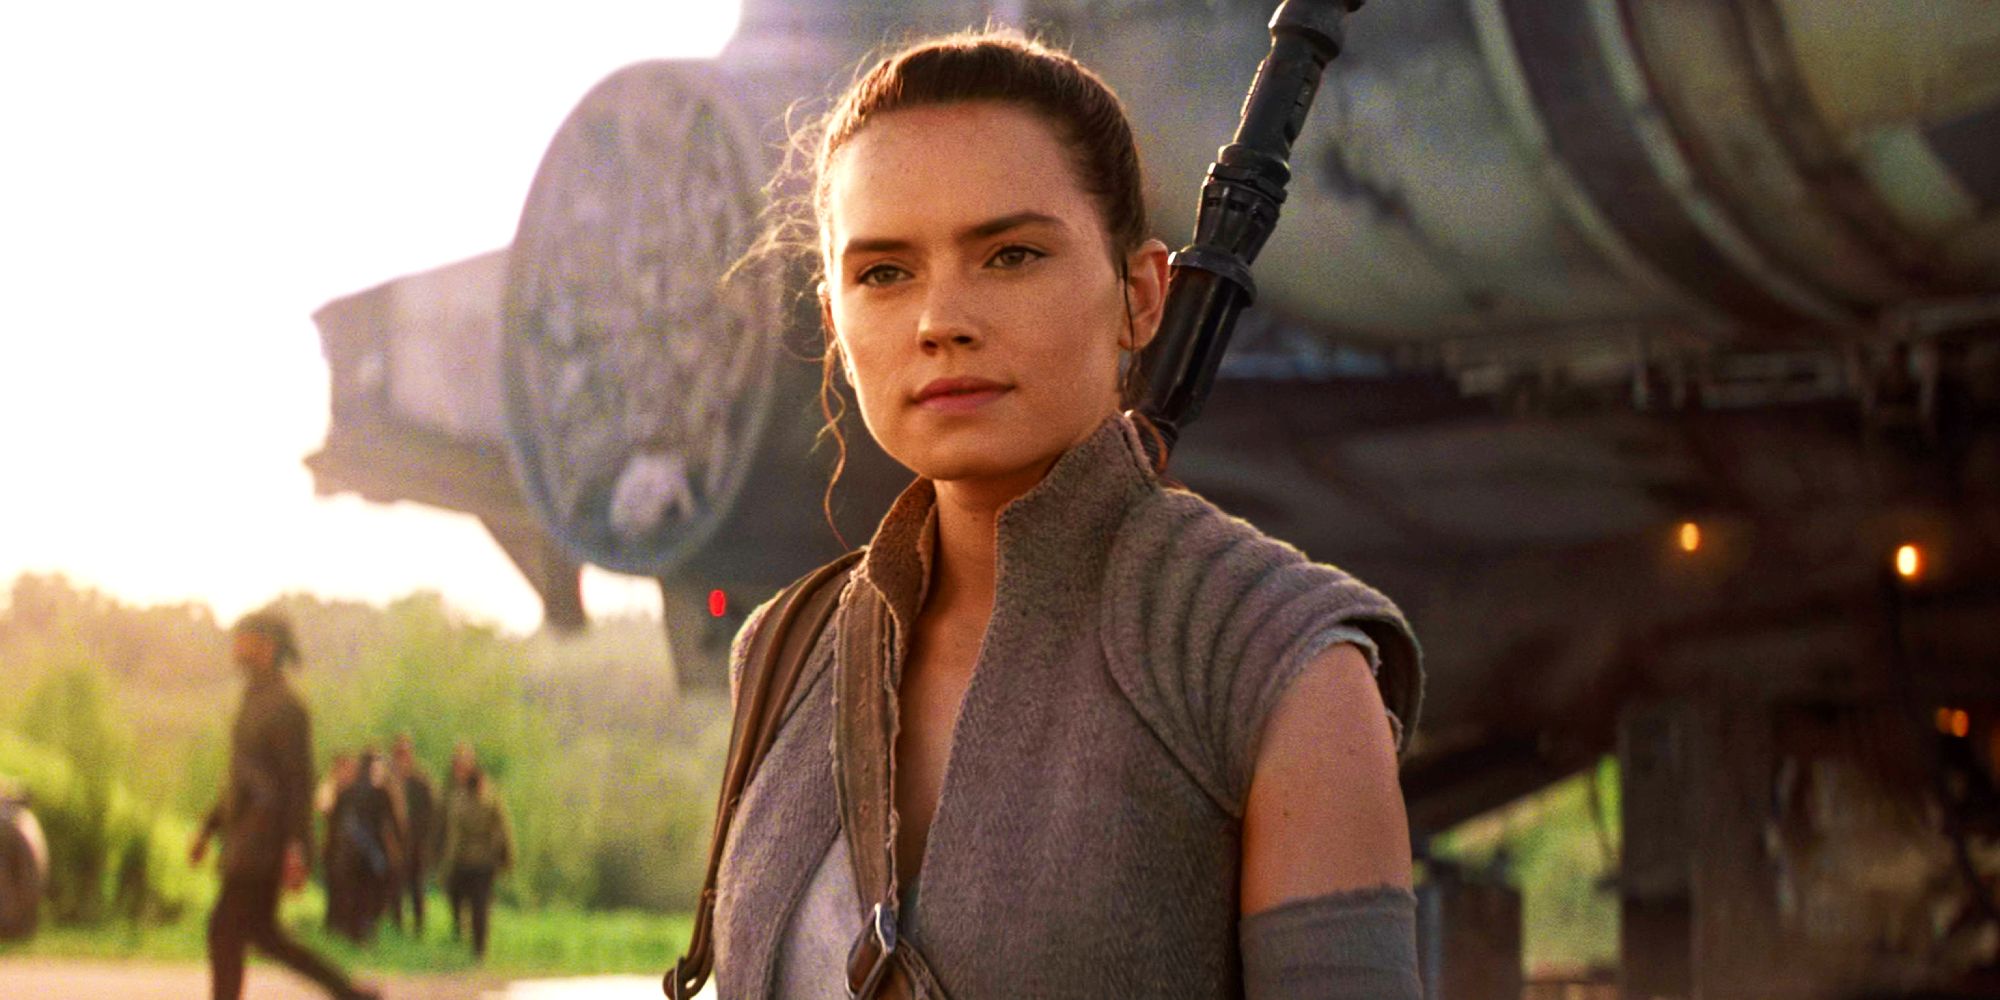 Daisy Ridley as Rey in front of the Millennium Falcon in Star Wars: The Force Awakens.